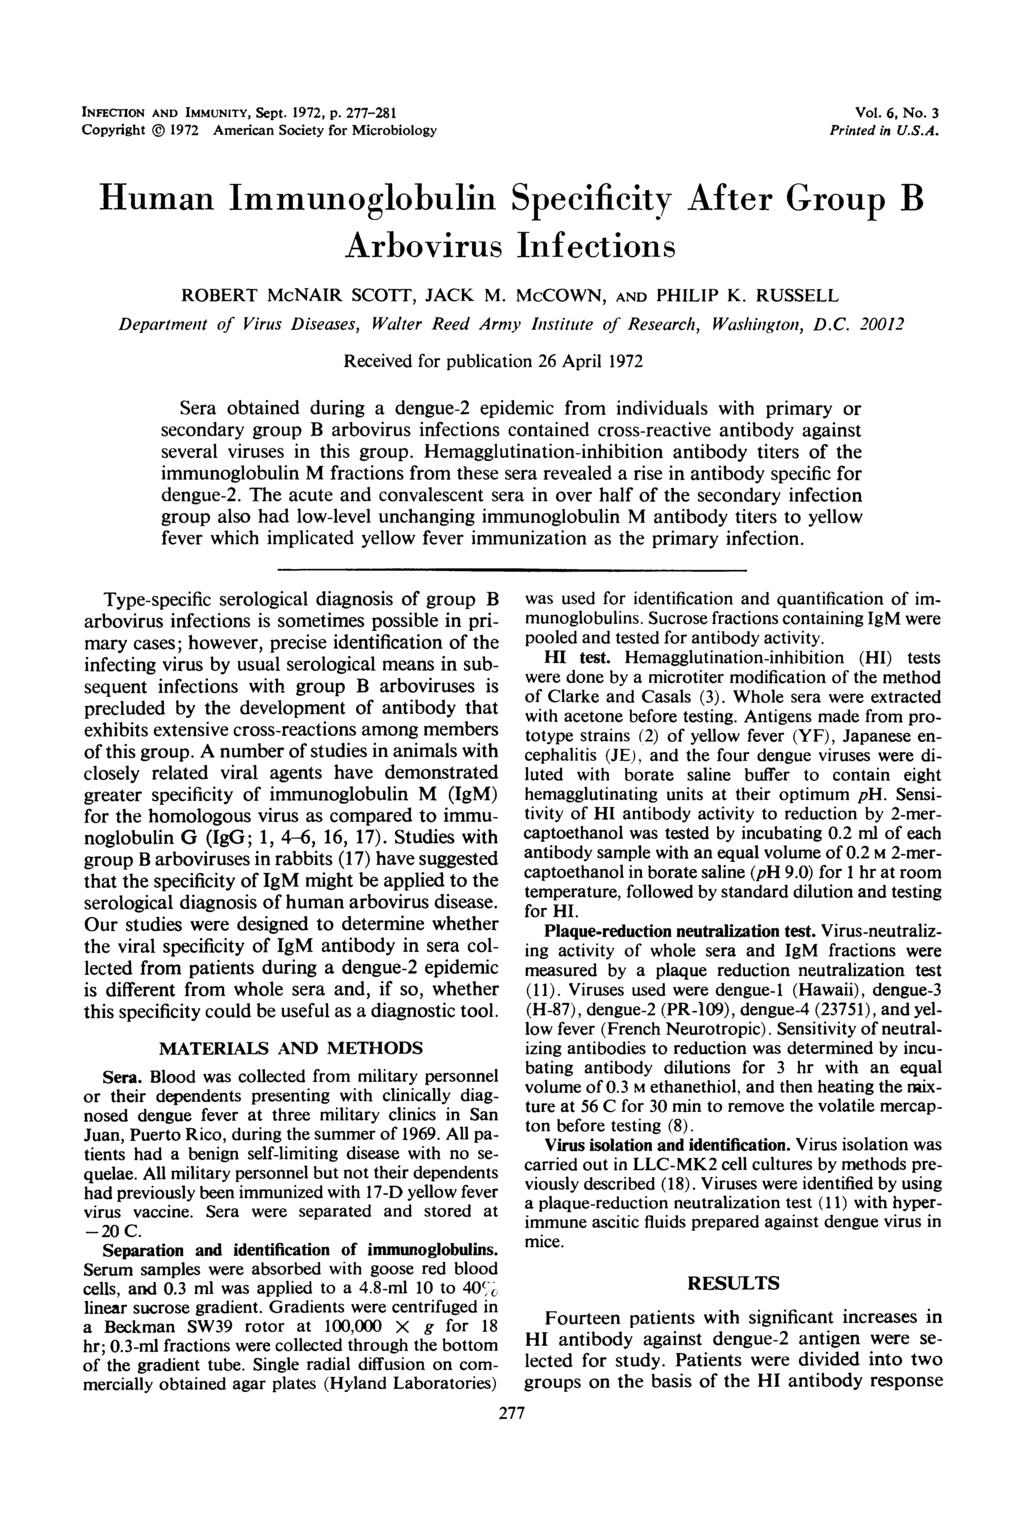 INFECTION AND IMMUNITY, Sept. 97, p. 77- Copyright @ 97 American Society for Microbiology Vol. 6, No. 3 Printed in U.S.A. Human Immunoglobulin Specificity After Group B Arbovirus Infections ROBERT McNAIR SCOTT, JACK M.